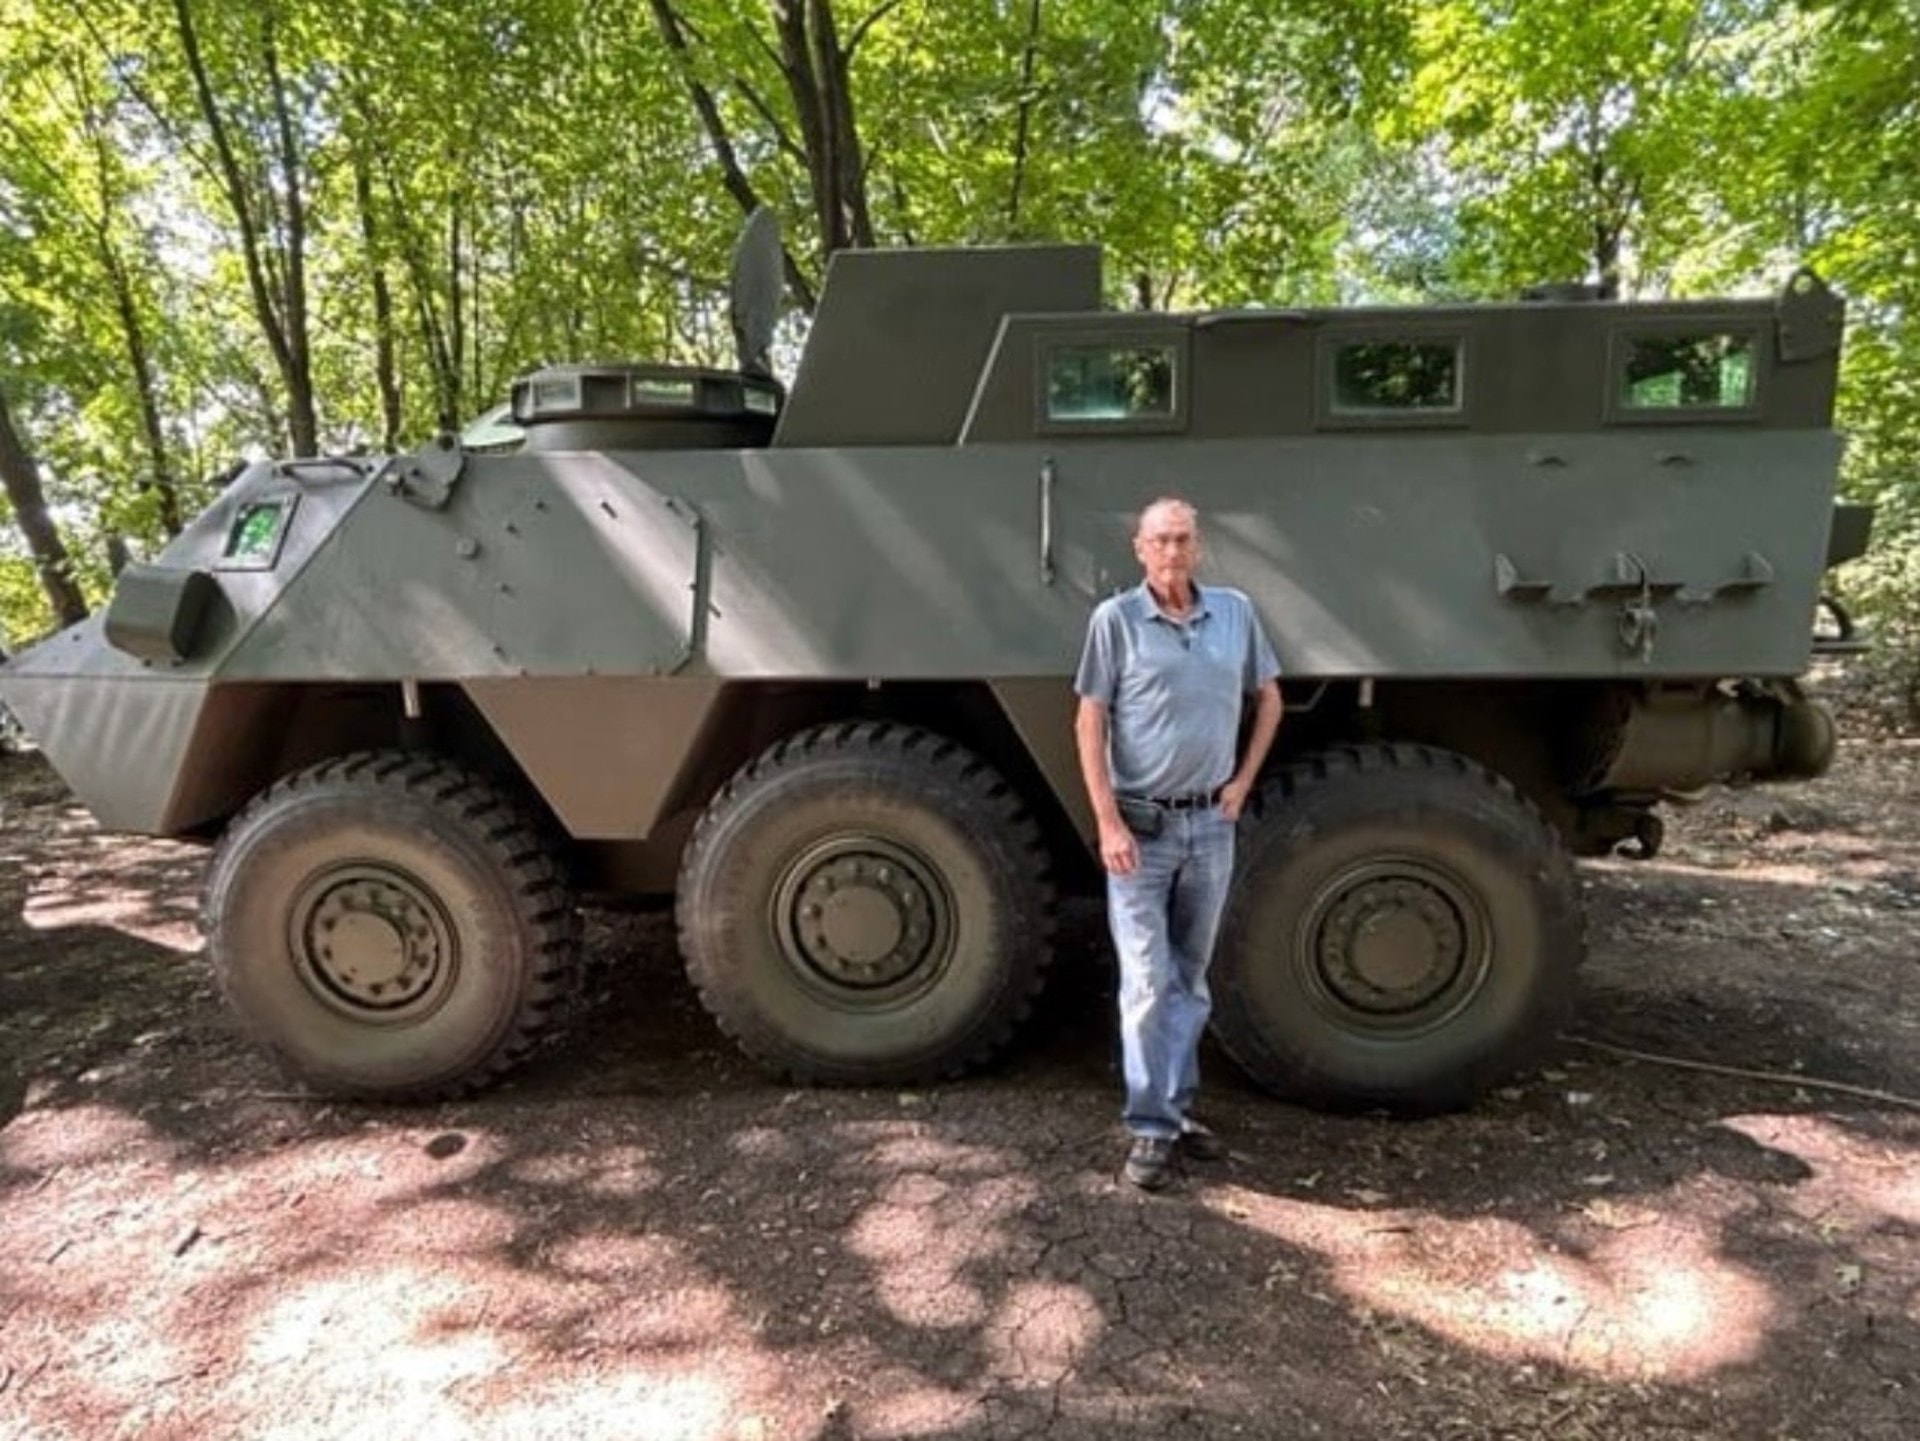 Pegaso BMR VRAC: The Ultra-Rare Spanish Armored Vehicle That